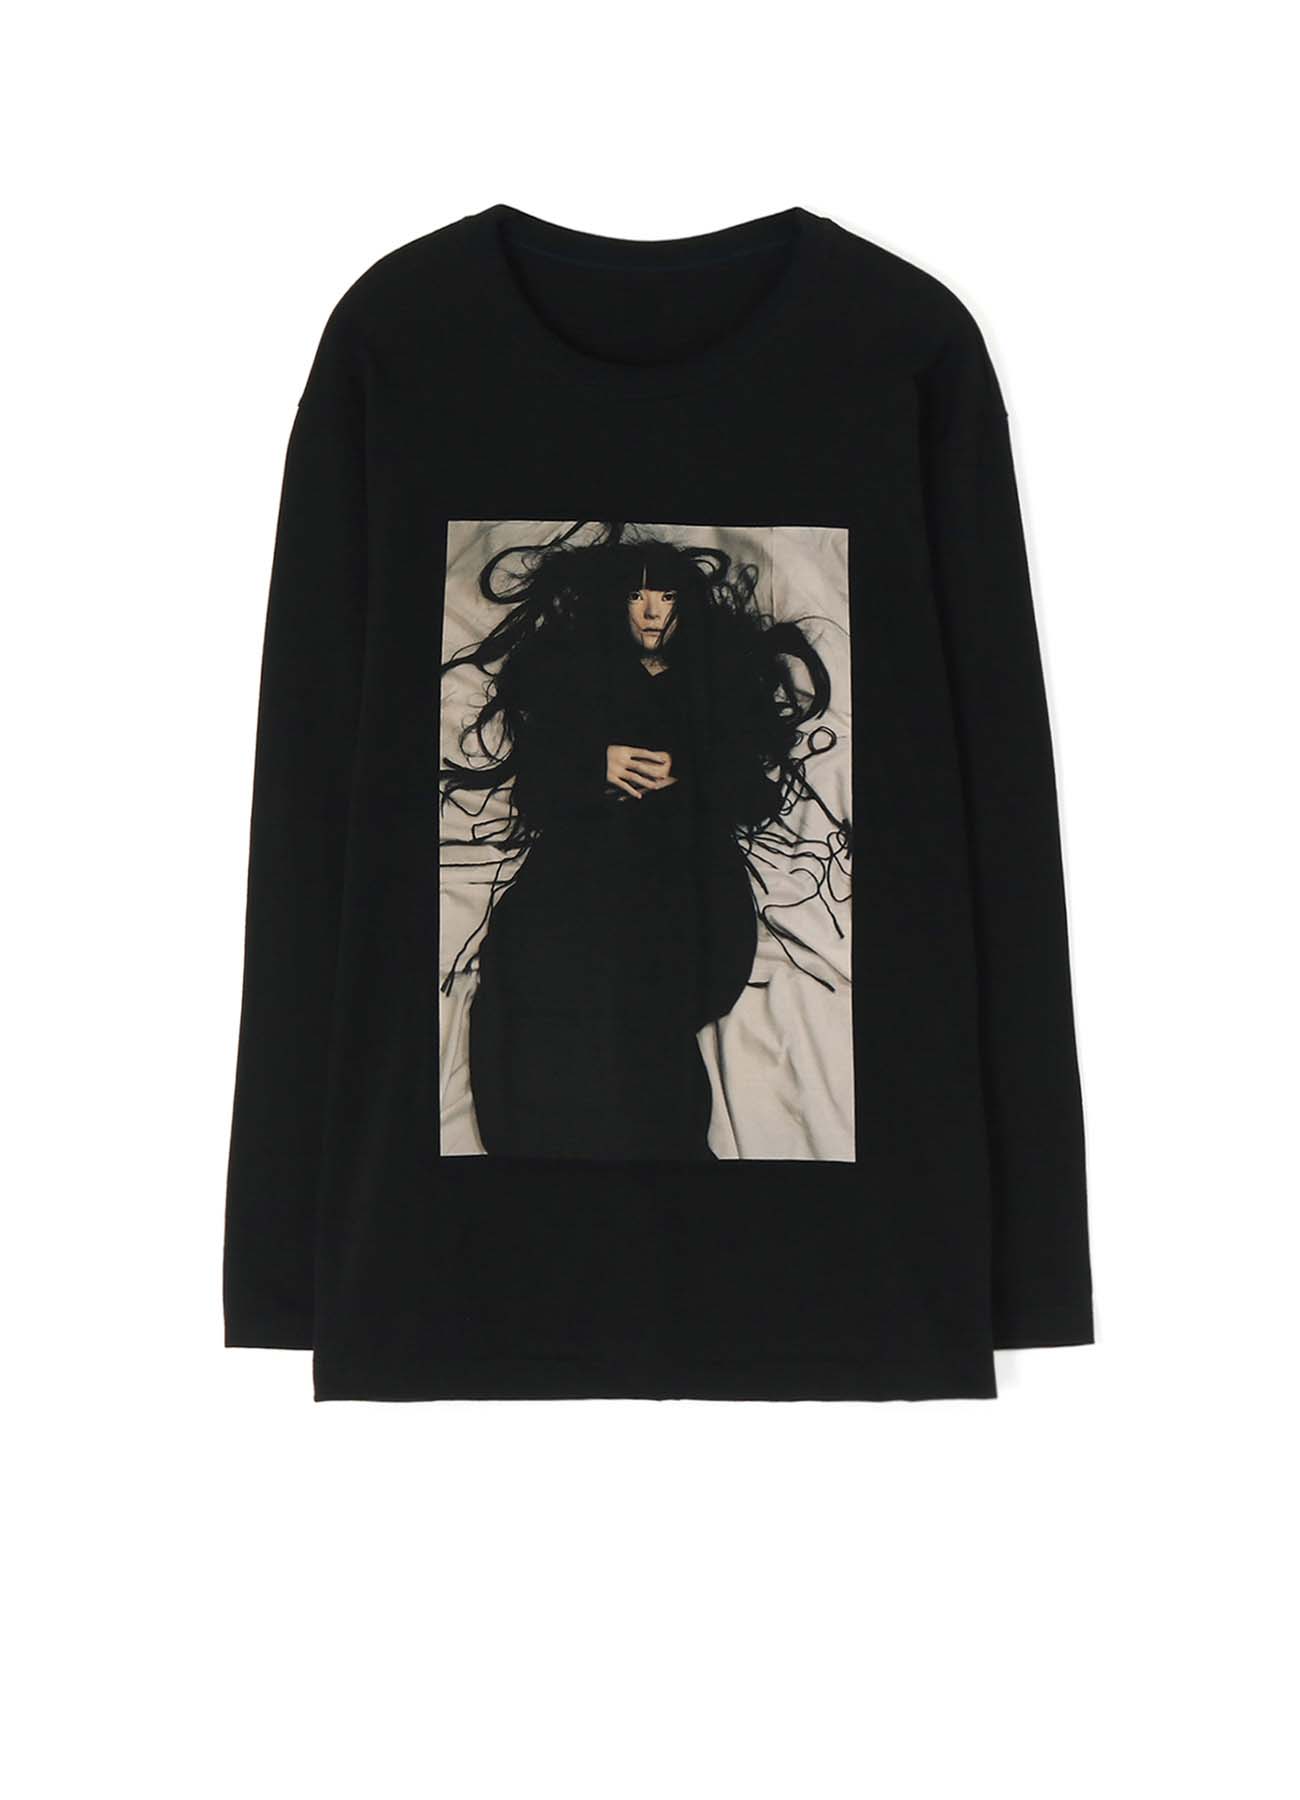 [Y's Ayumidoll Collection]PIGMENT DISCHARGE PRINT LONG SLEEVE T -誰そ彼-